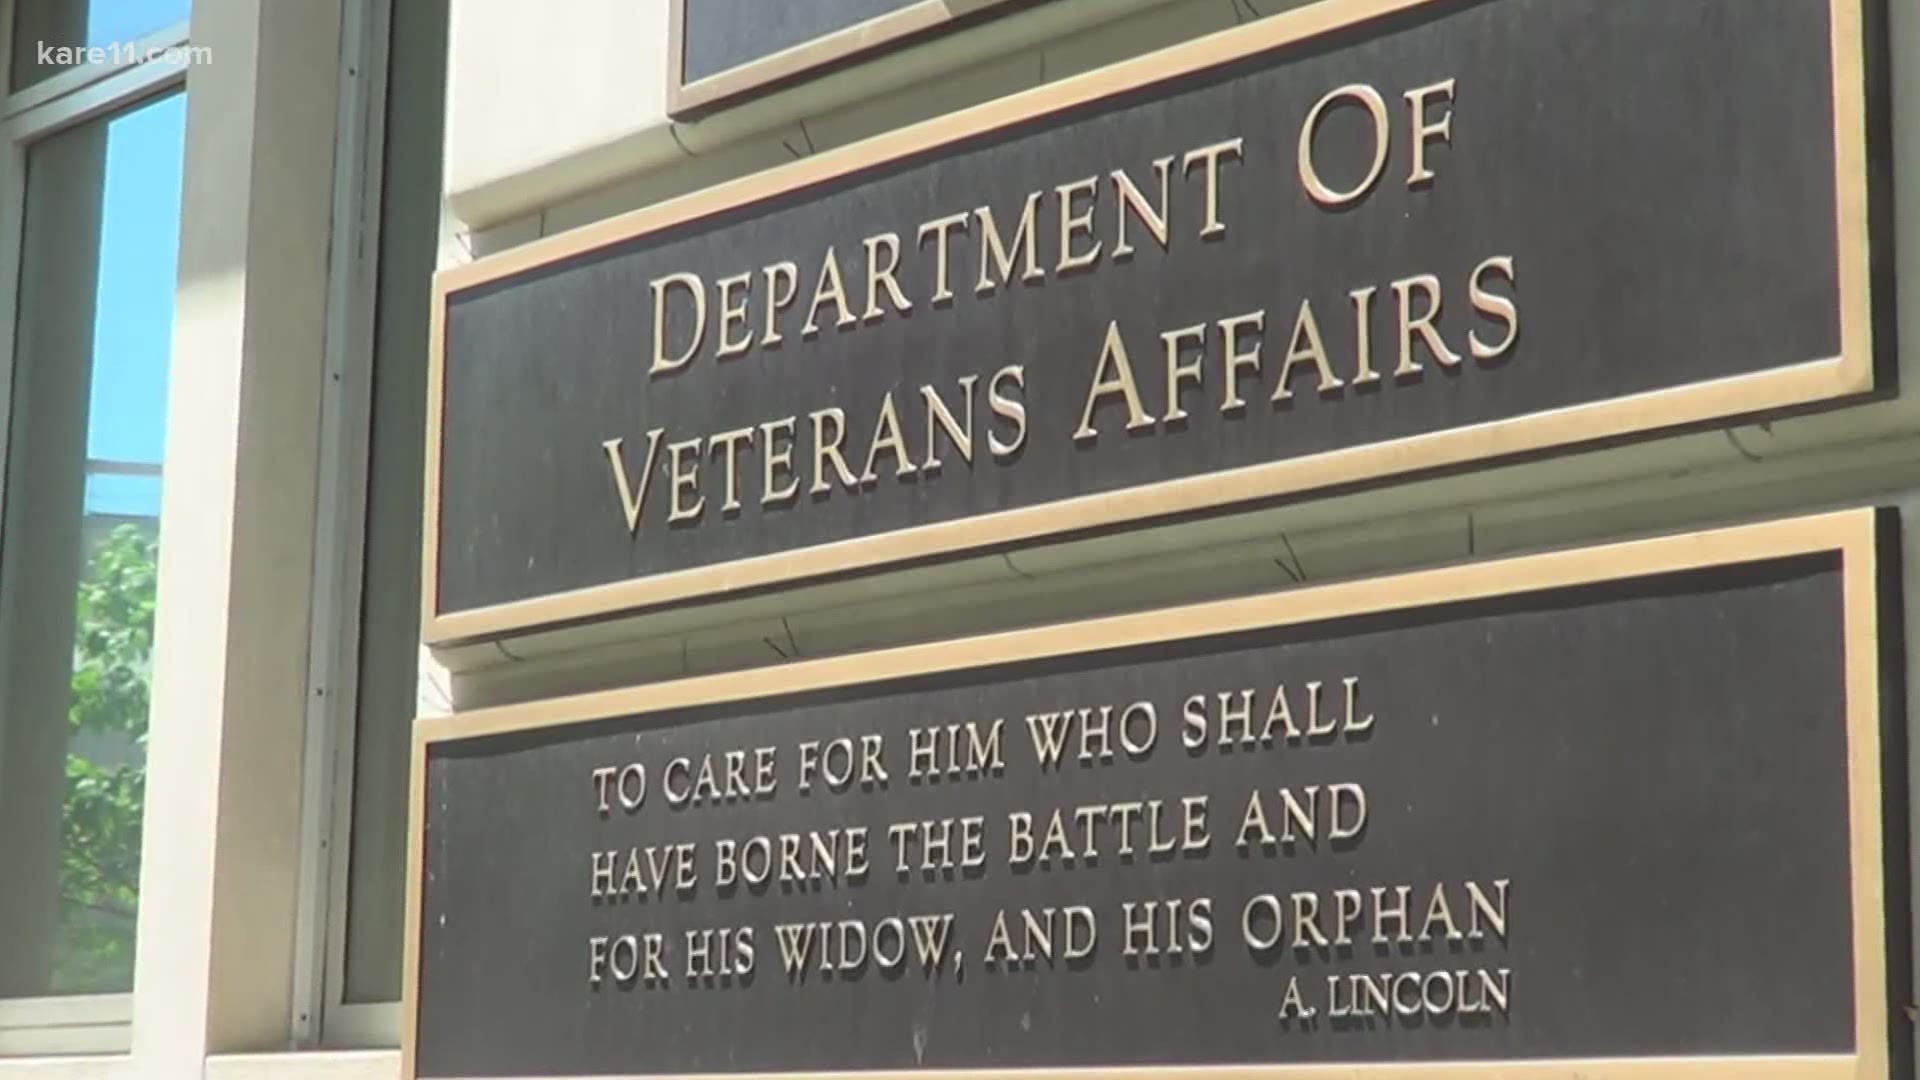 Internal VA records obtained by KARE 11 reveal approximately 20,000 benefits claims may have been improperly denied during the COVID-19 pandemic.